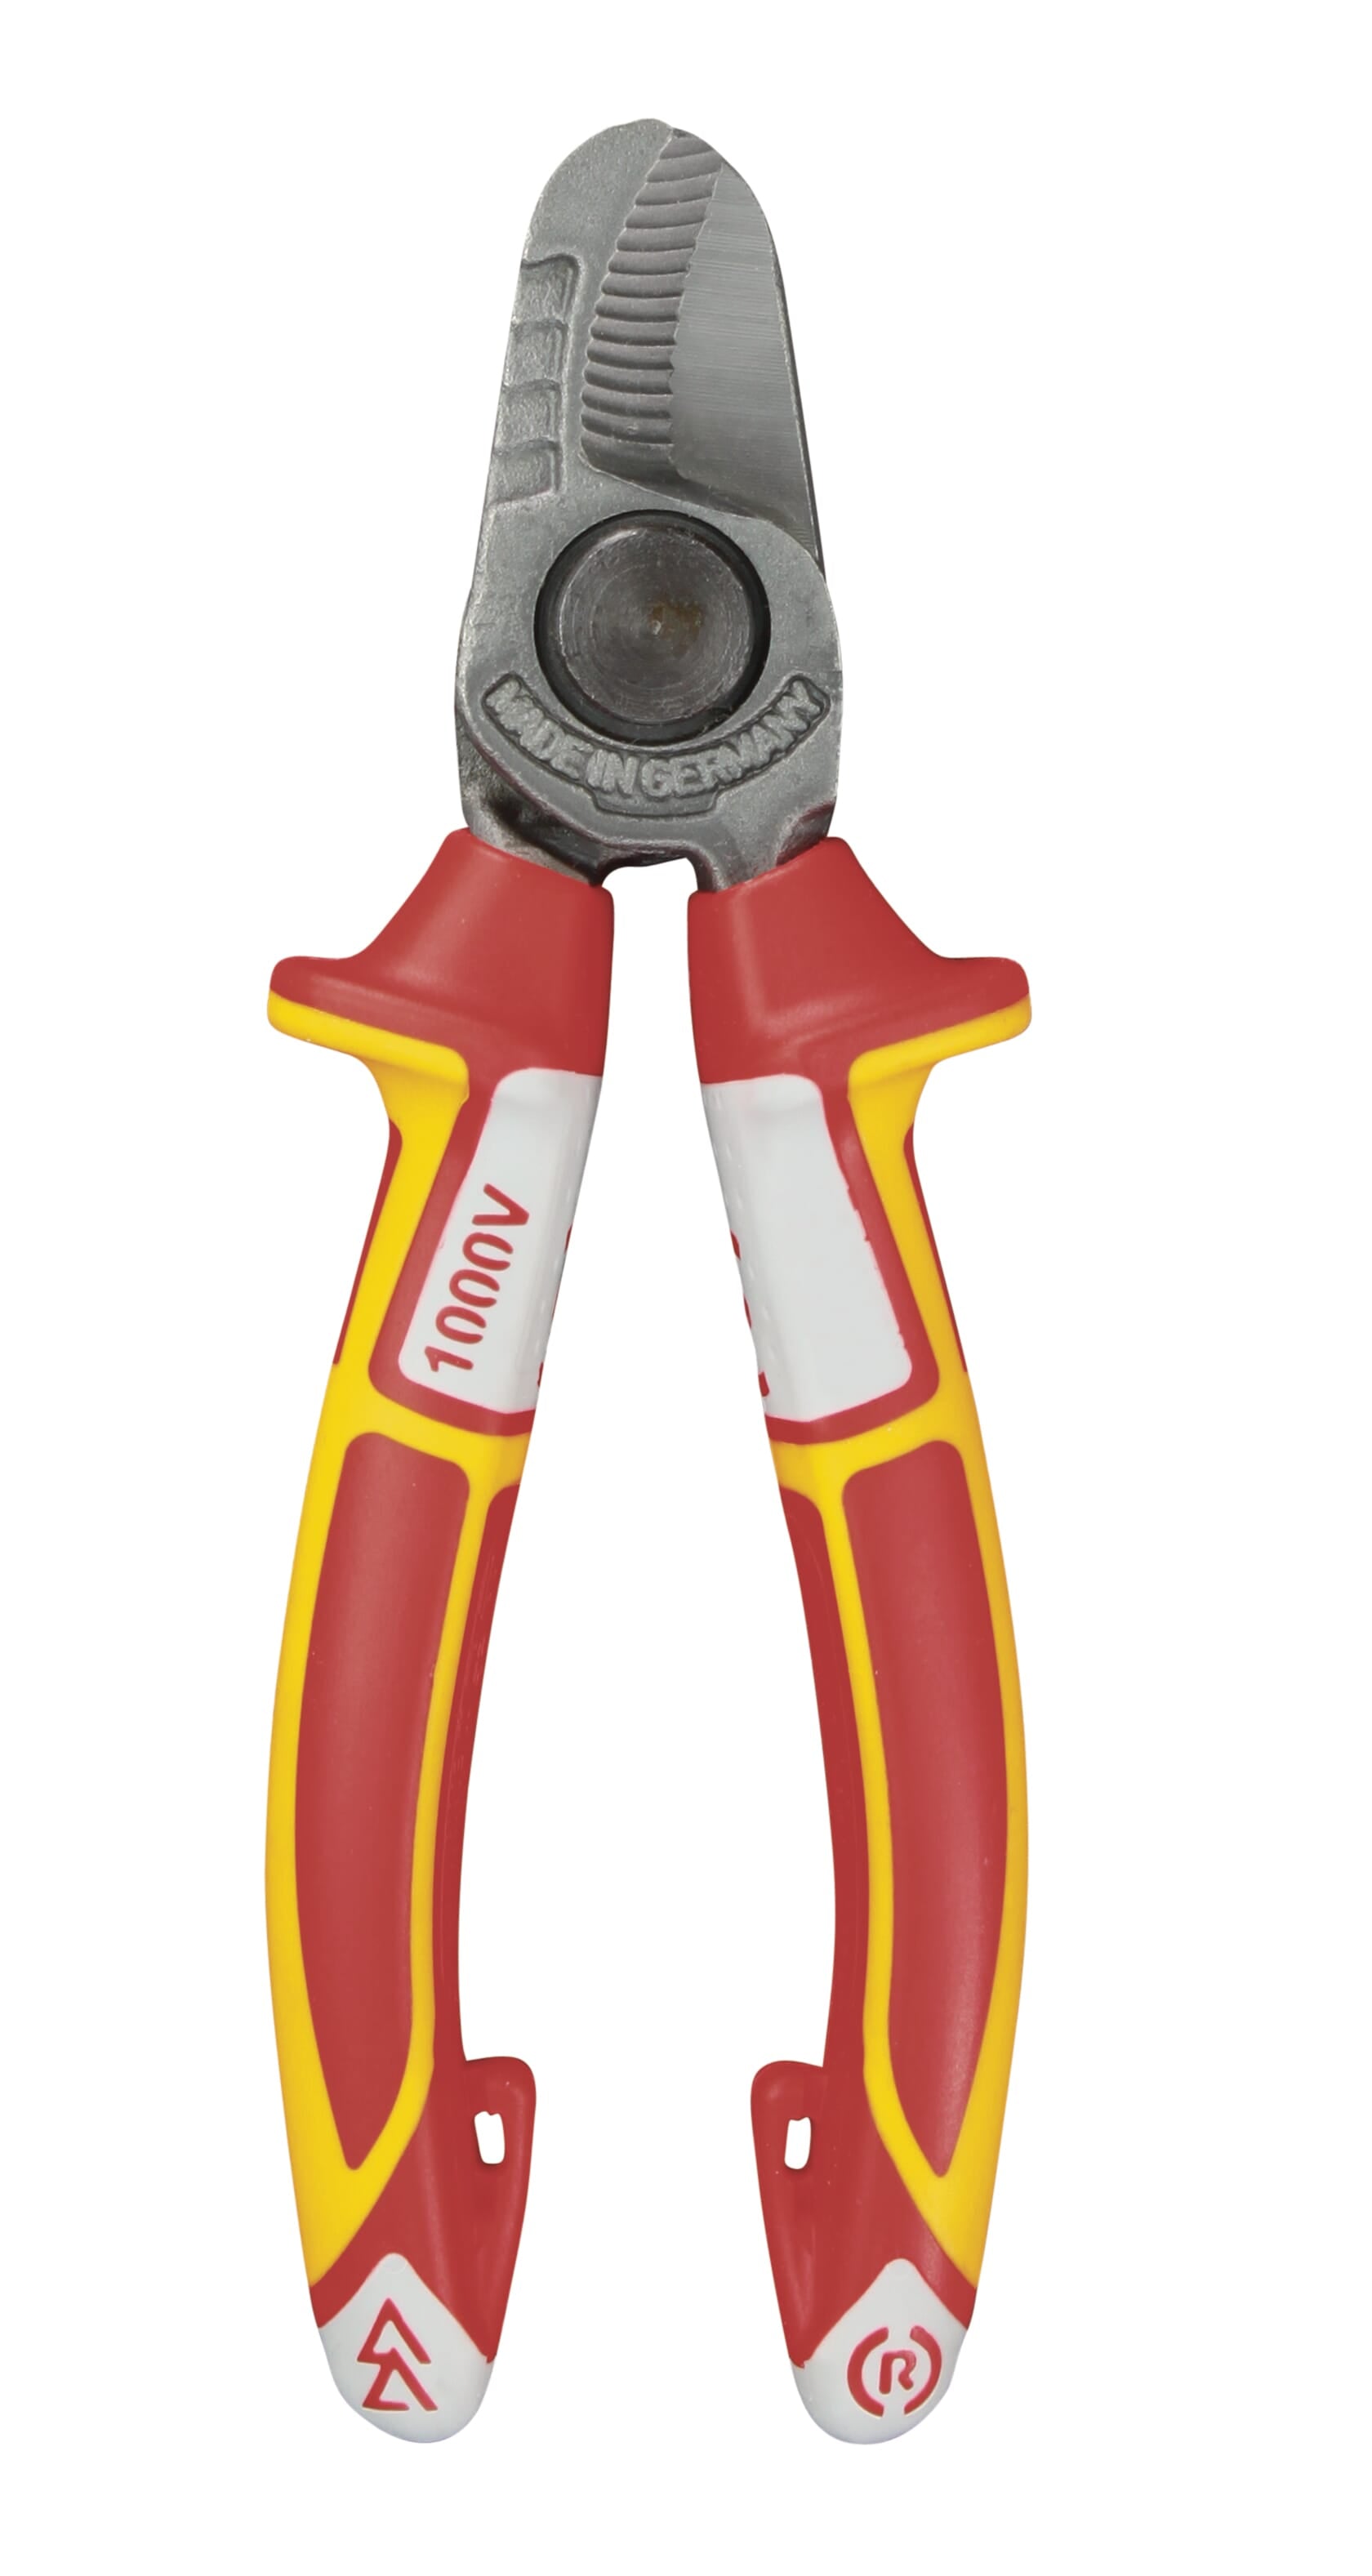 Felo Cable Cutter Vde 160Mm X 16Mm Capacity